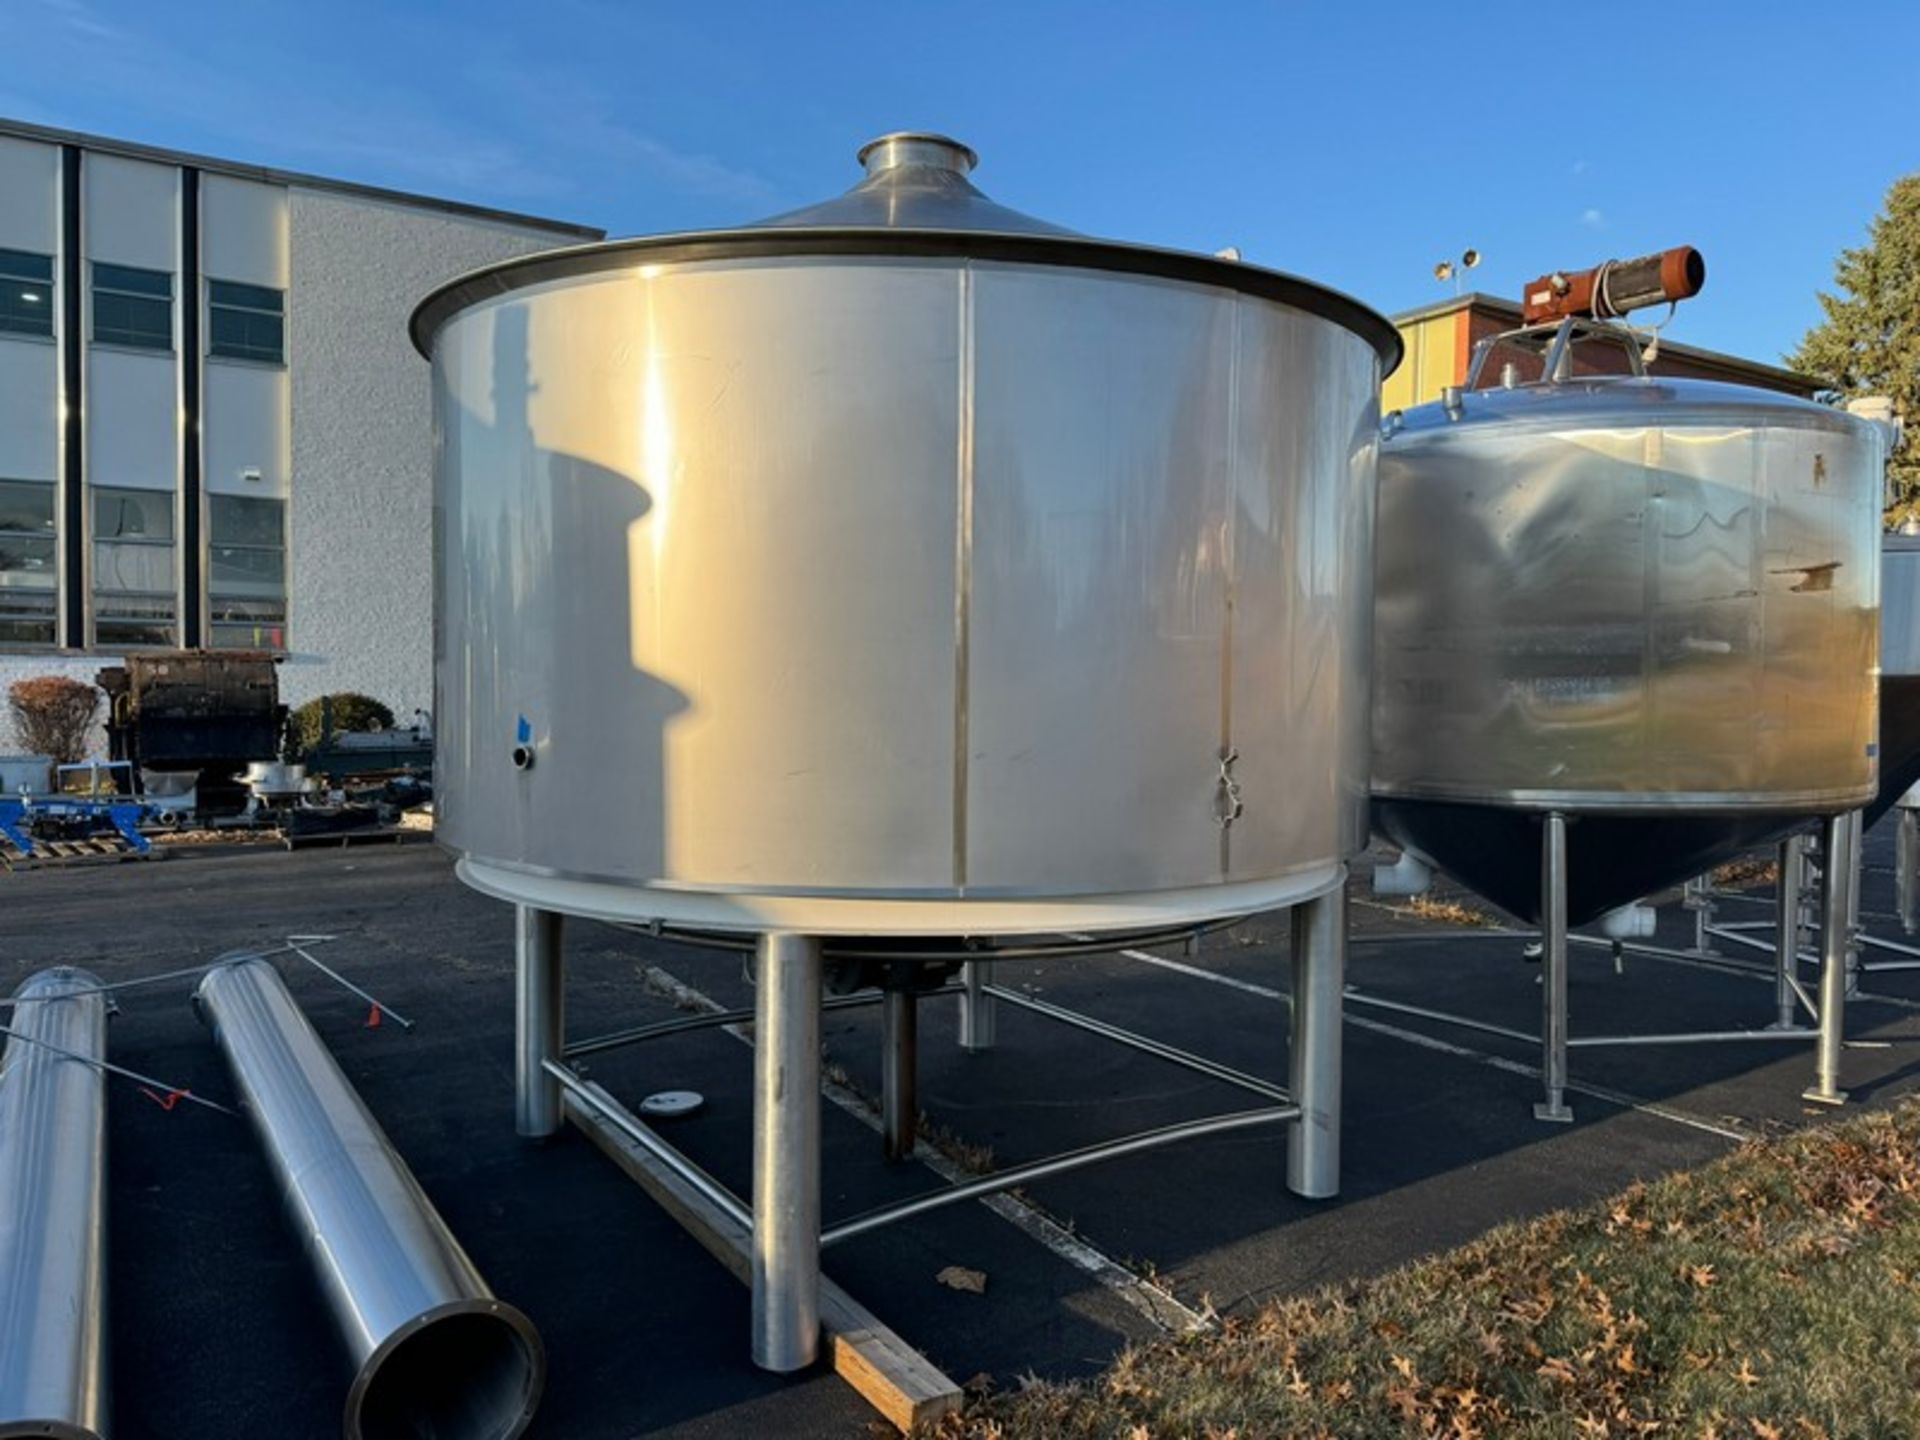 2012 Specific Mechanical Systems 45 BBL Capacity S/S Lauter Tun Tank, S/N RMP-136-12, with Legs, - Image 5 of 14